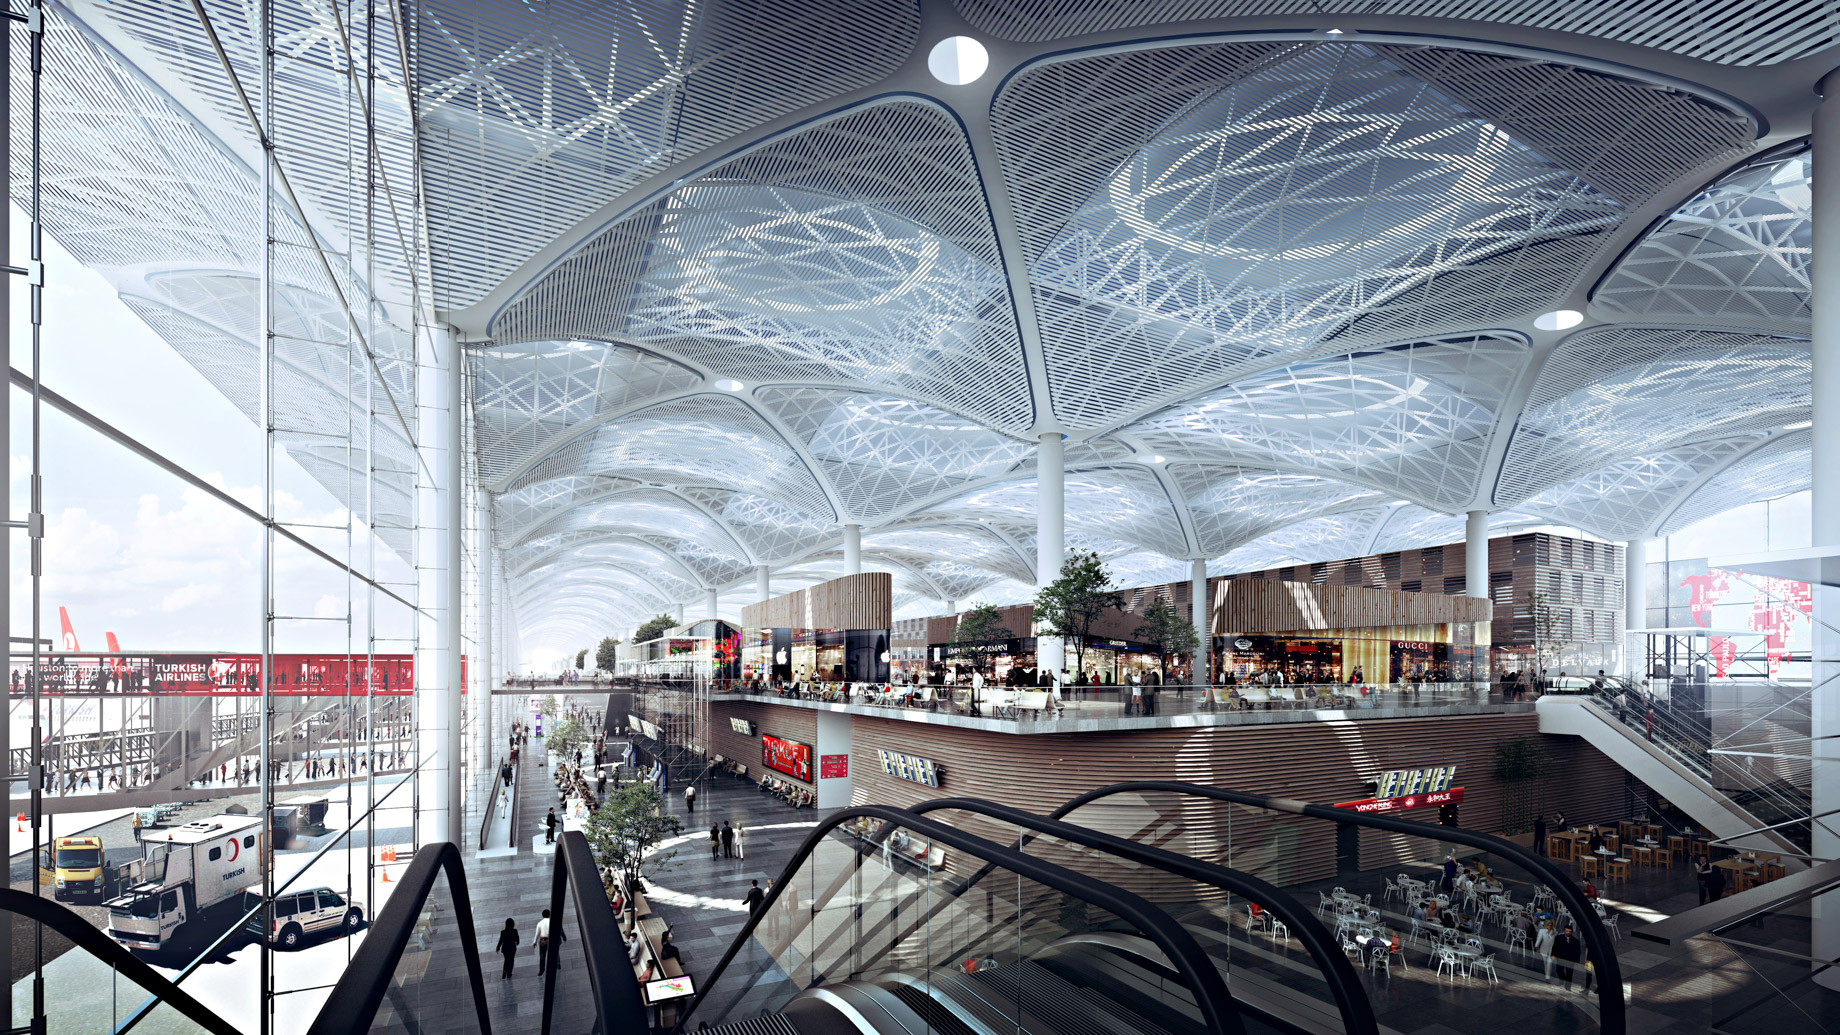 Airside - New International Airport in Istanbul, Turkey will be a Modern Architectural Masterpiece